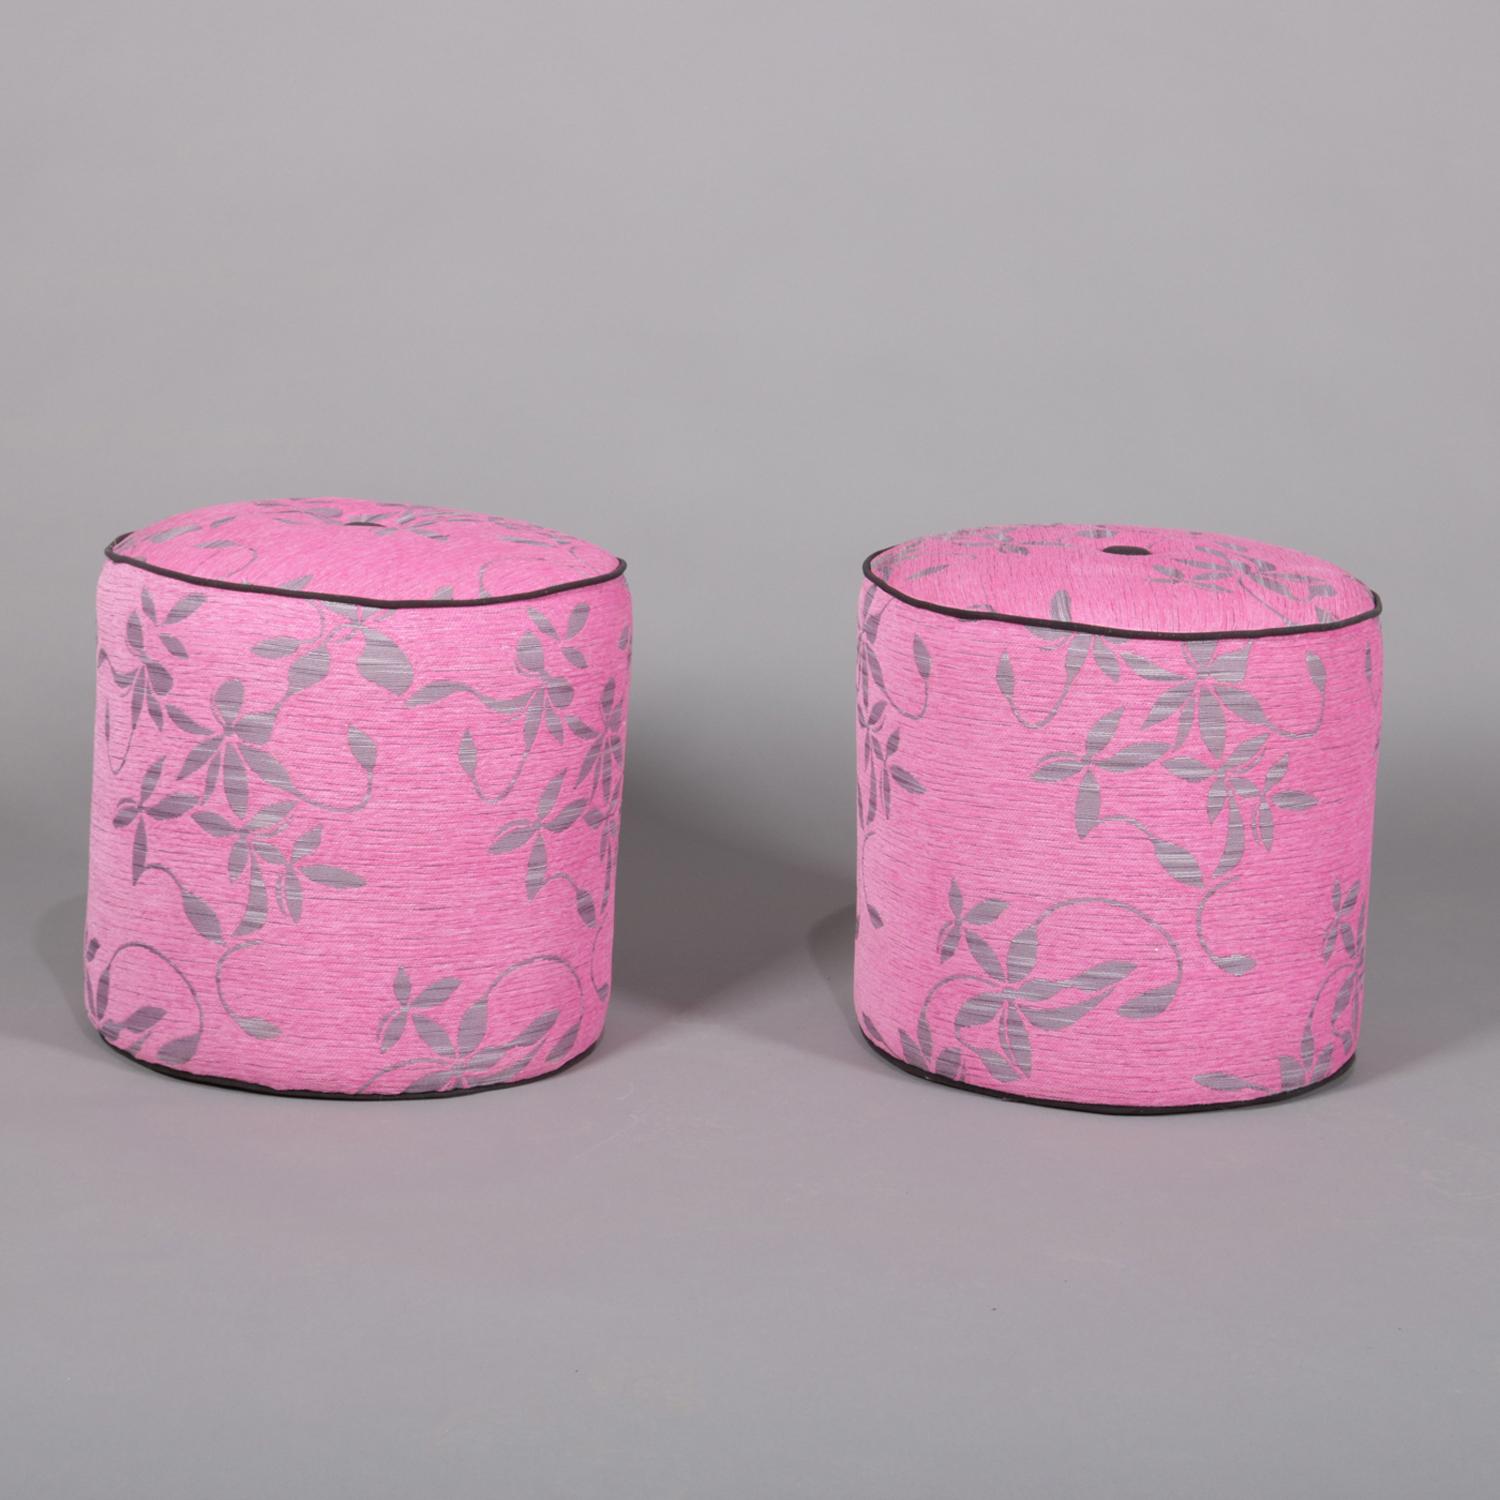 Pair of contemporary Aesthetic movement style ottoman poufs feature fuschia pink upholstery with silver foliate decoration, black piping and center button, 20th century.

***DELIVERY NOTICE – Due to COVID-19 we are employing NO-CONTACT PRACTICES in